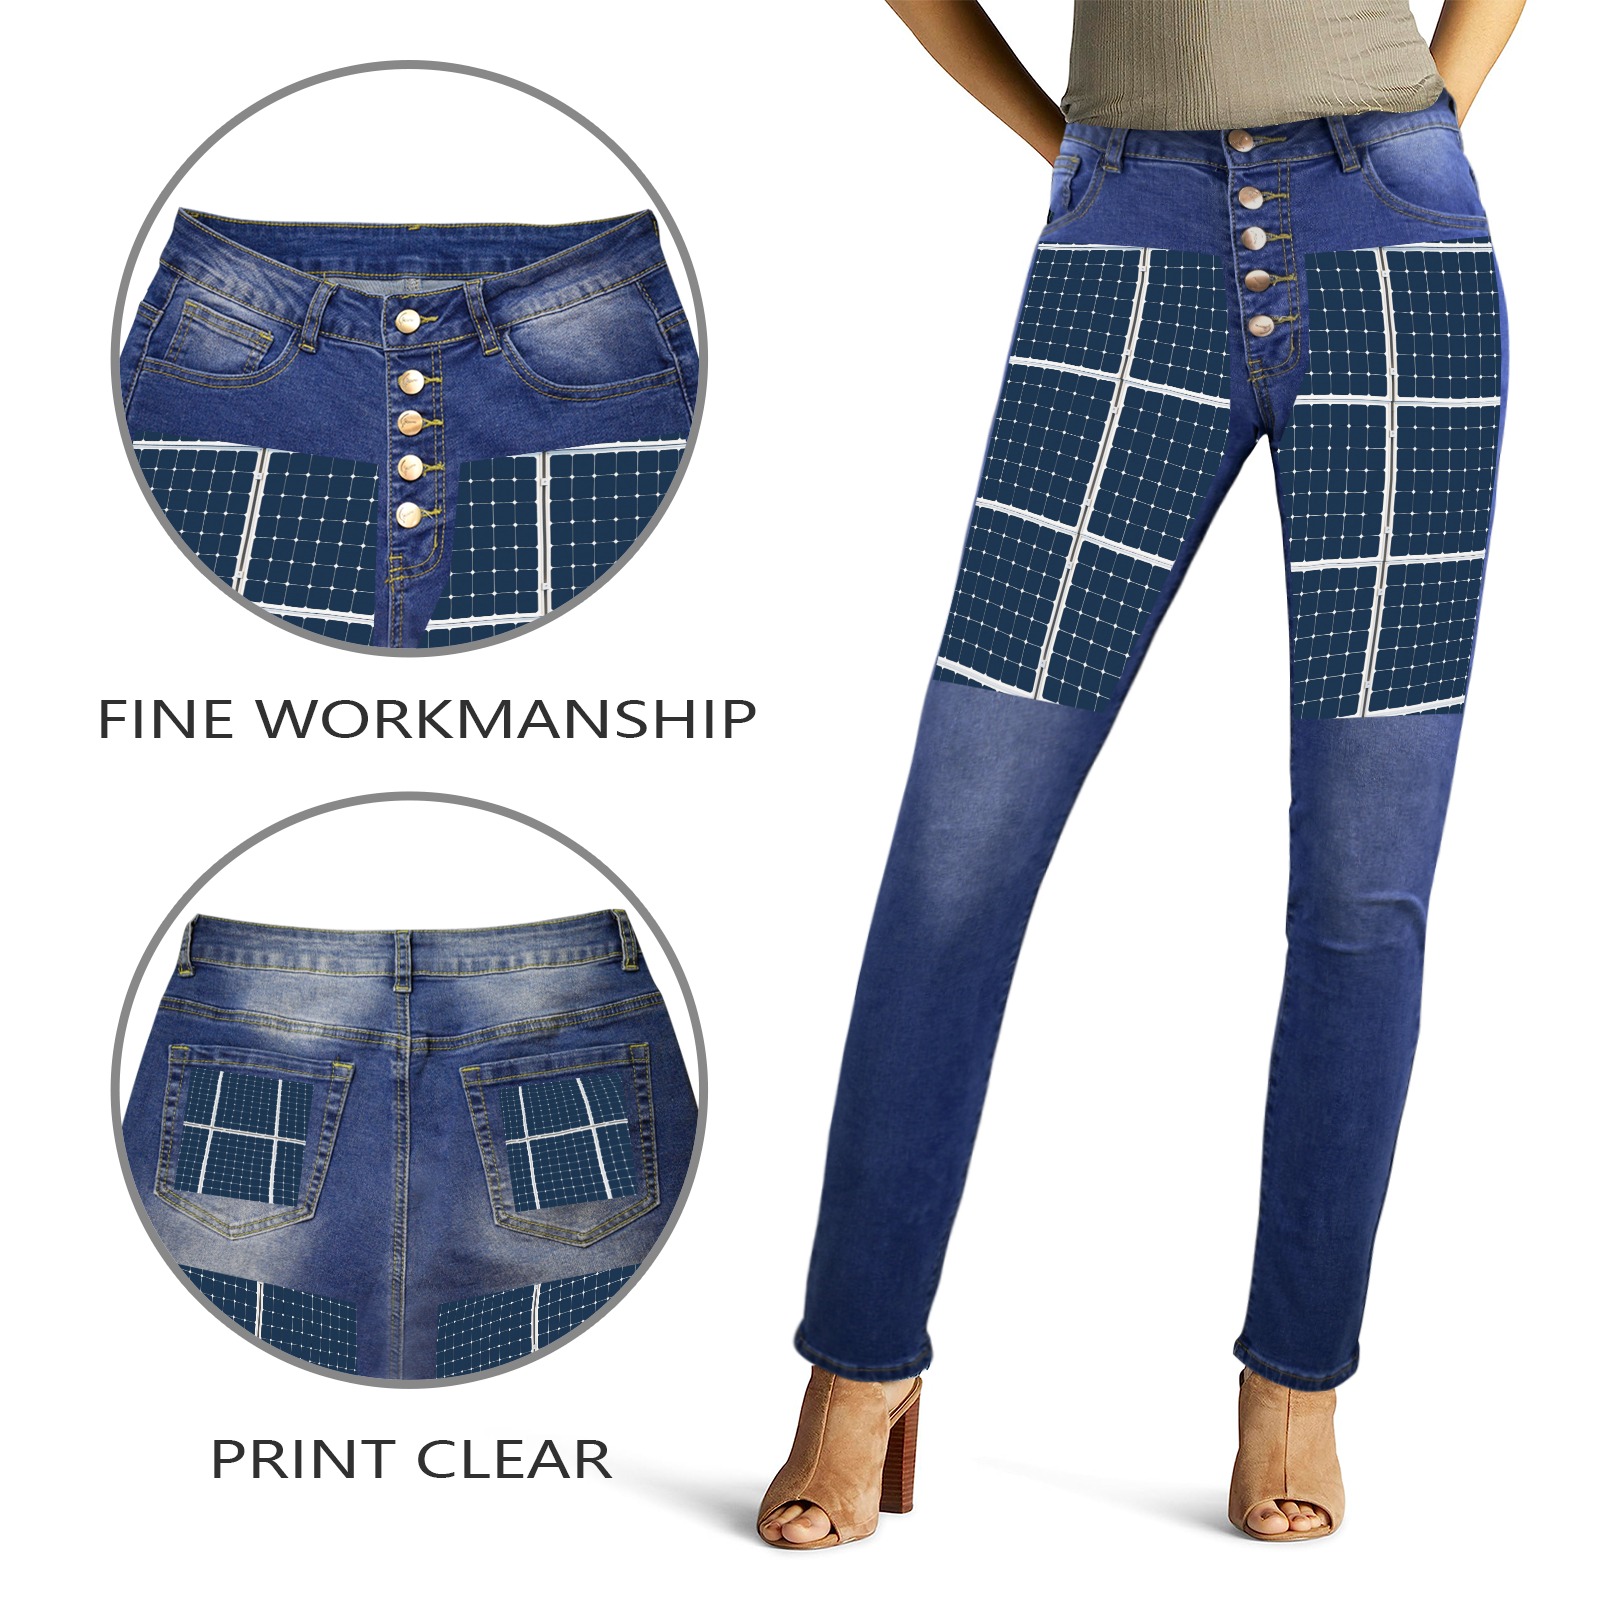 Solar Technology Power Panel Image Photovoltaic Women's Jeans (Front&Back Printing)